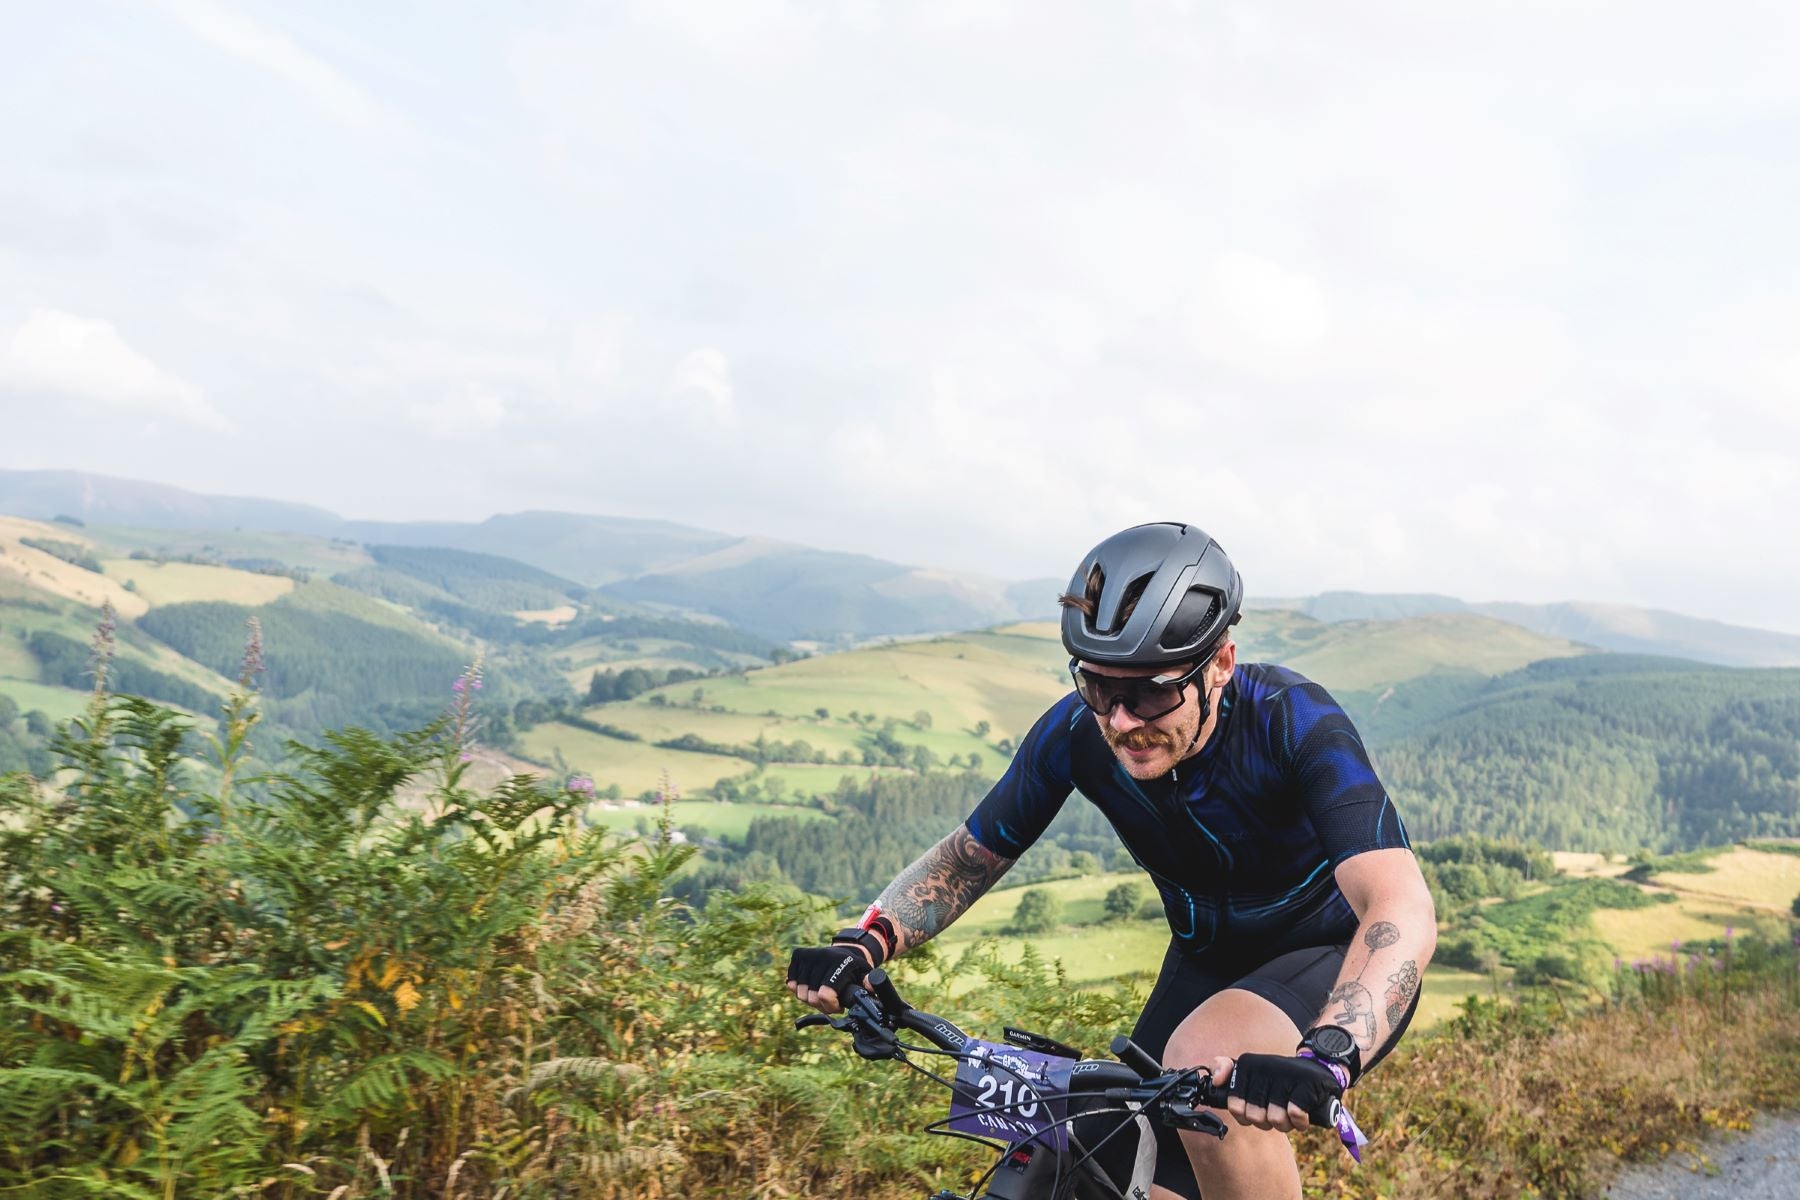 chris hall rides in race through beautiful countryside view